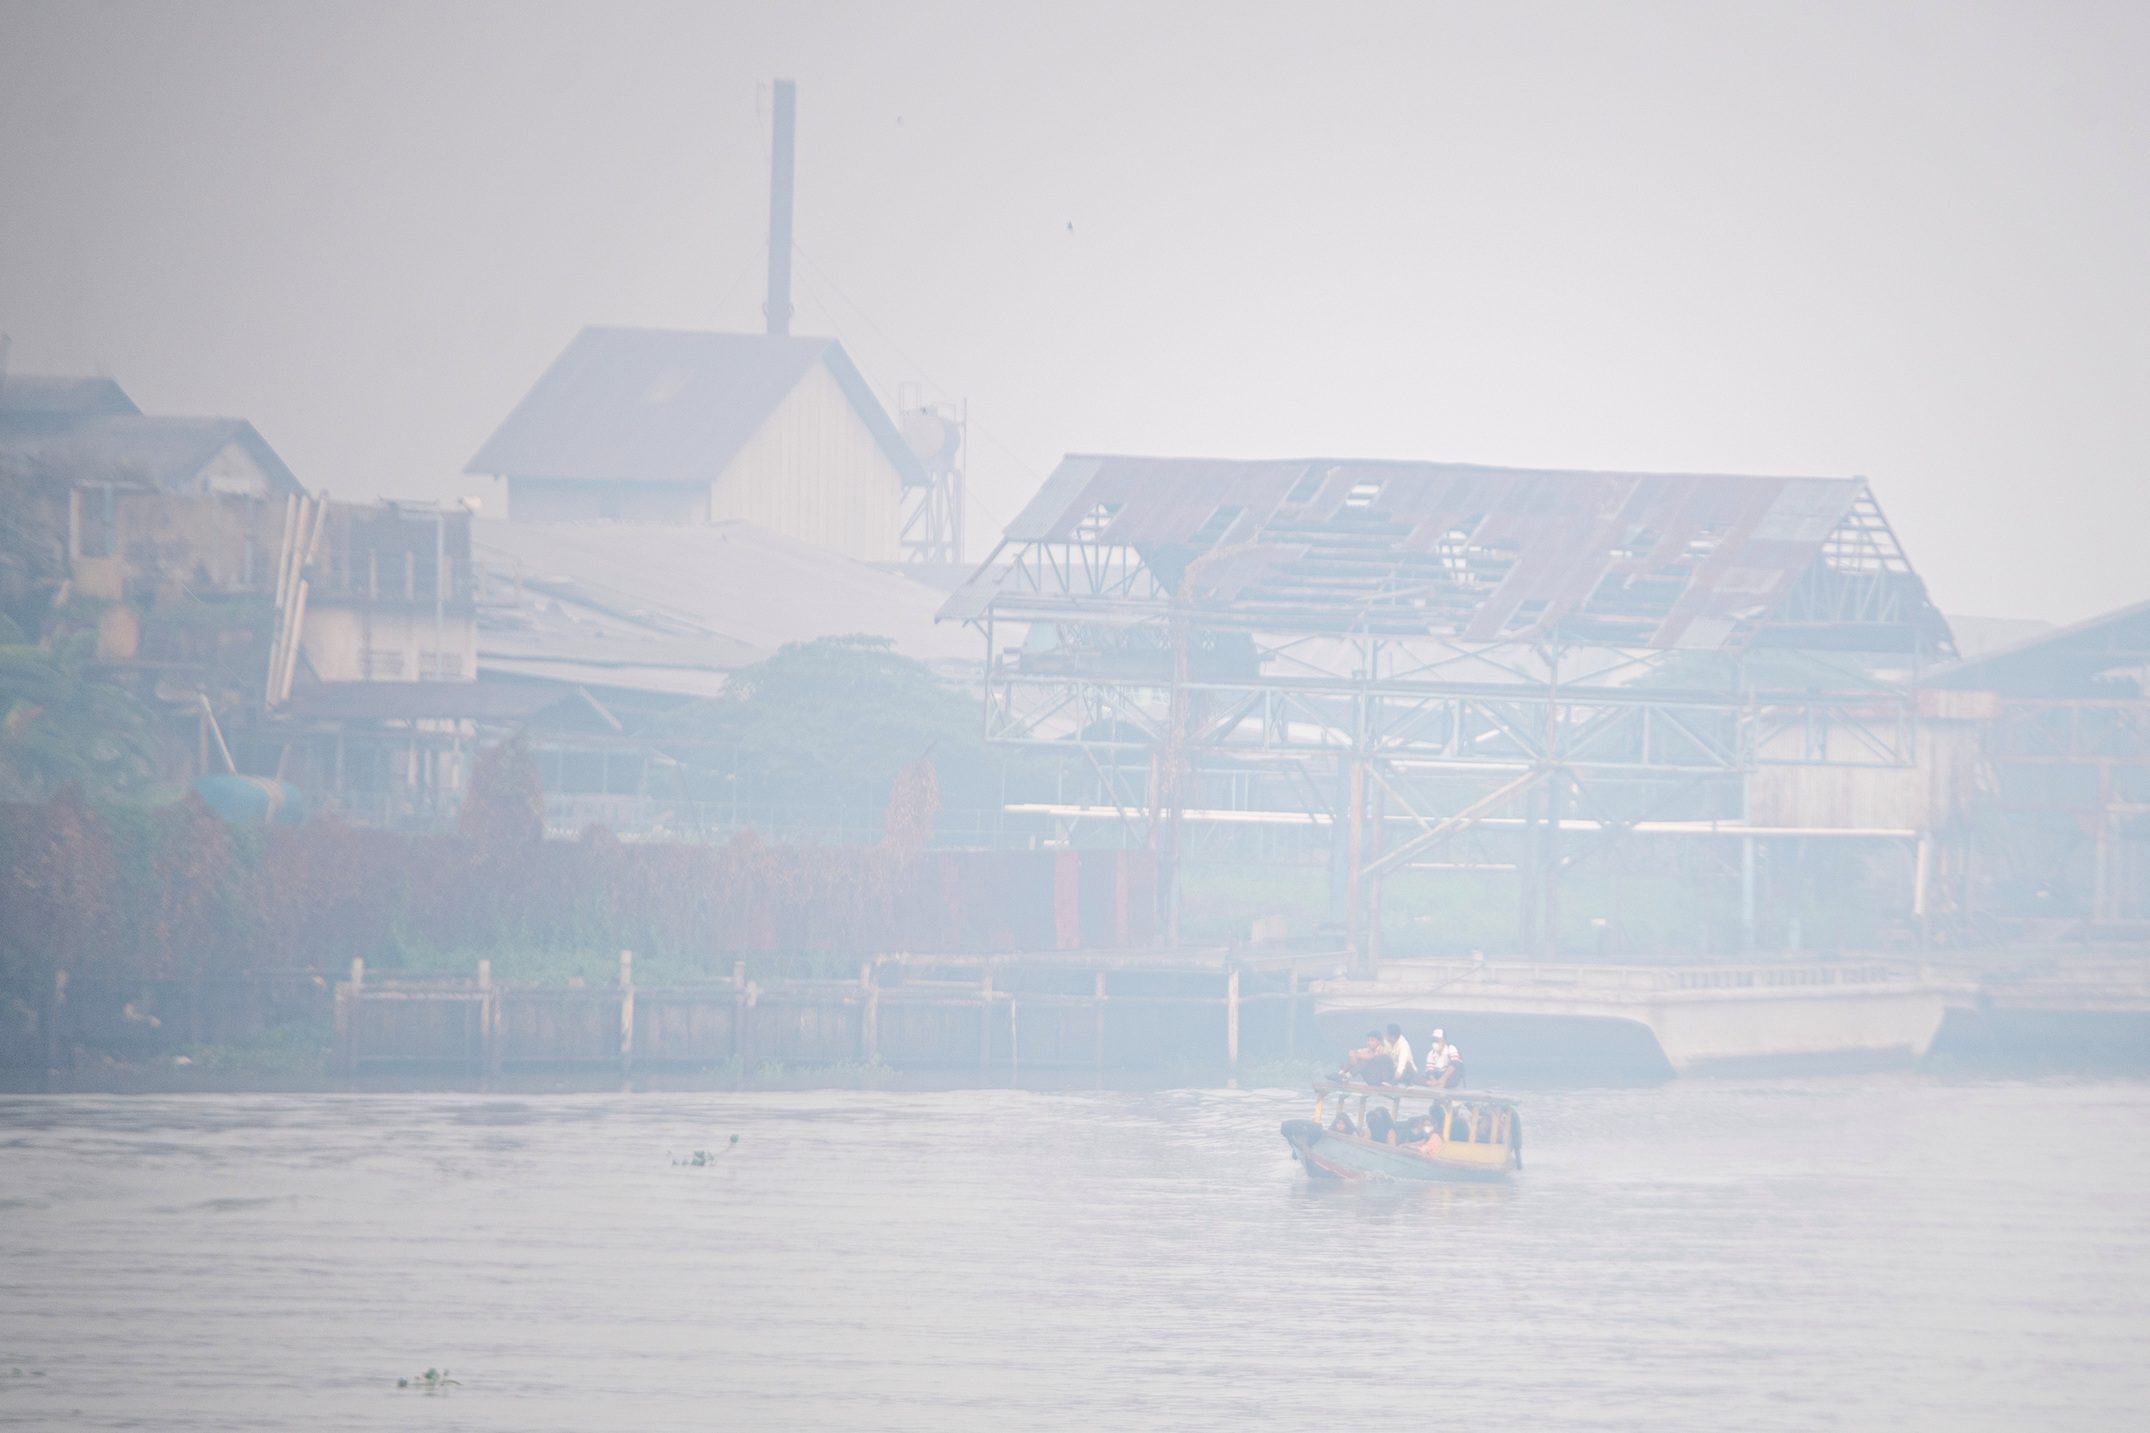 EXPLAINER: What’s causing the chronic haze across Southeast Asia?